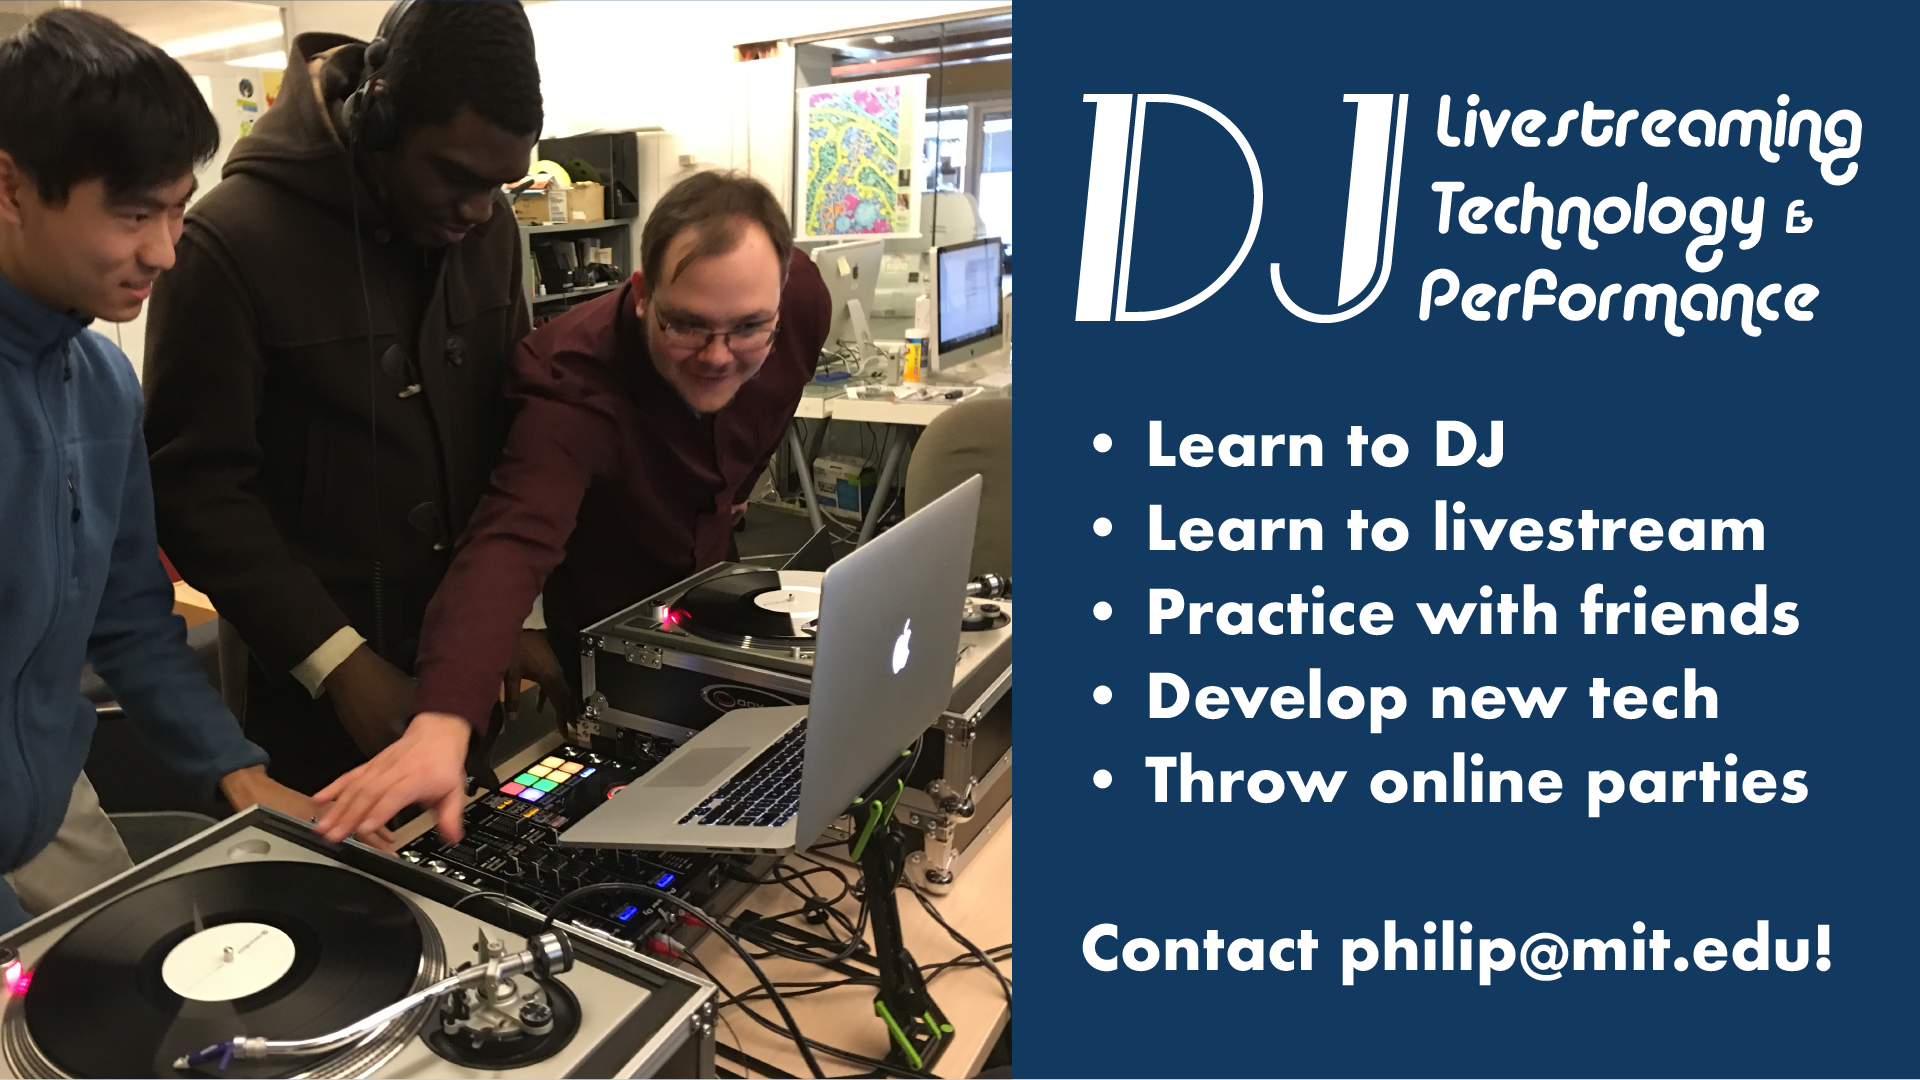 Spring Experiential Learning Opportunity for MIT undergrads: Live Streaming DJ Technology and Performance